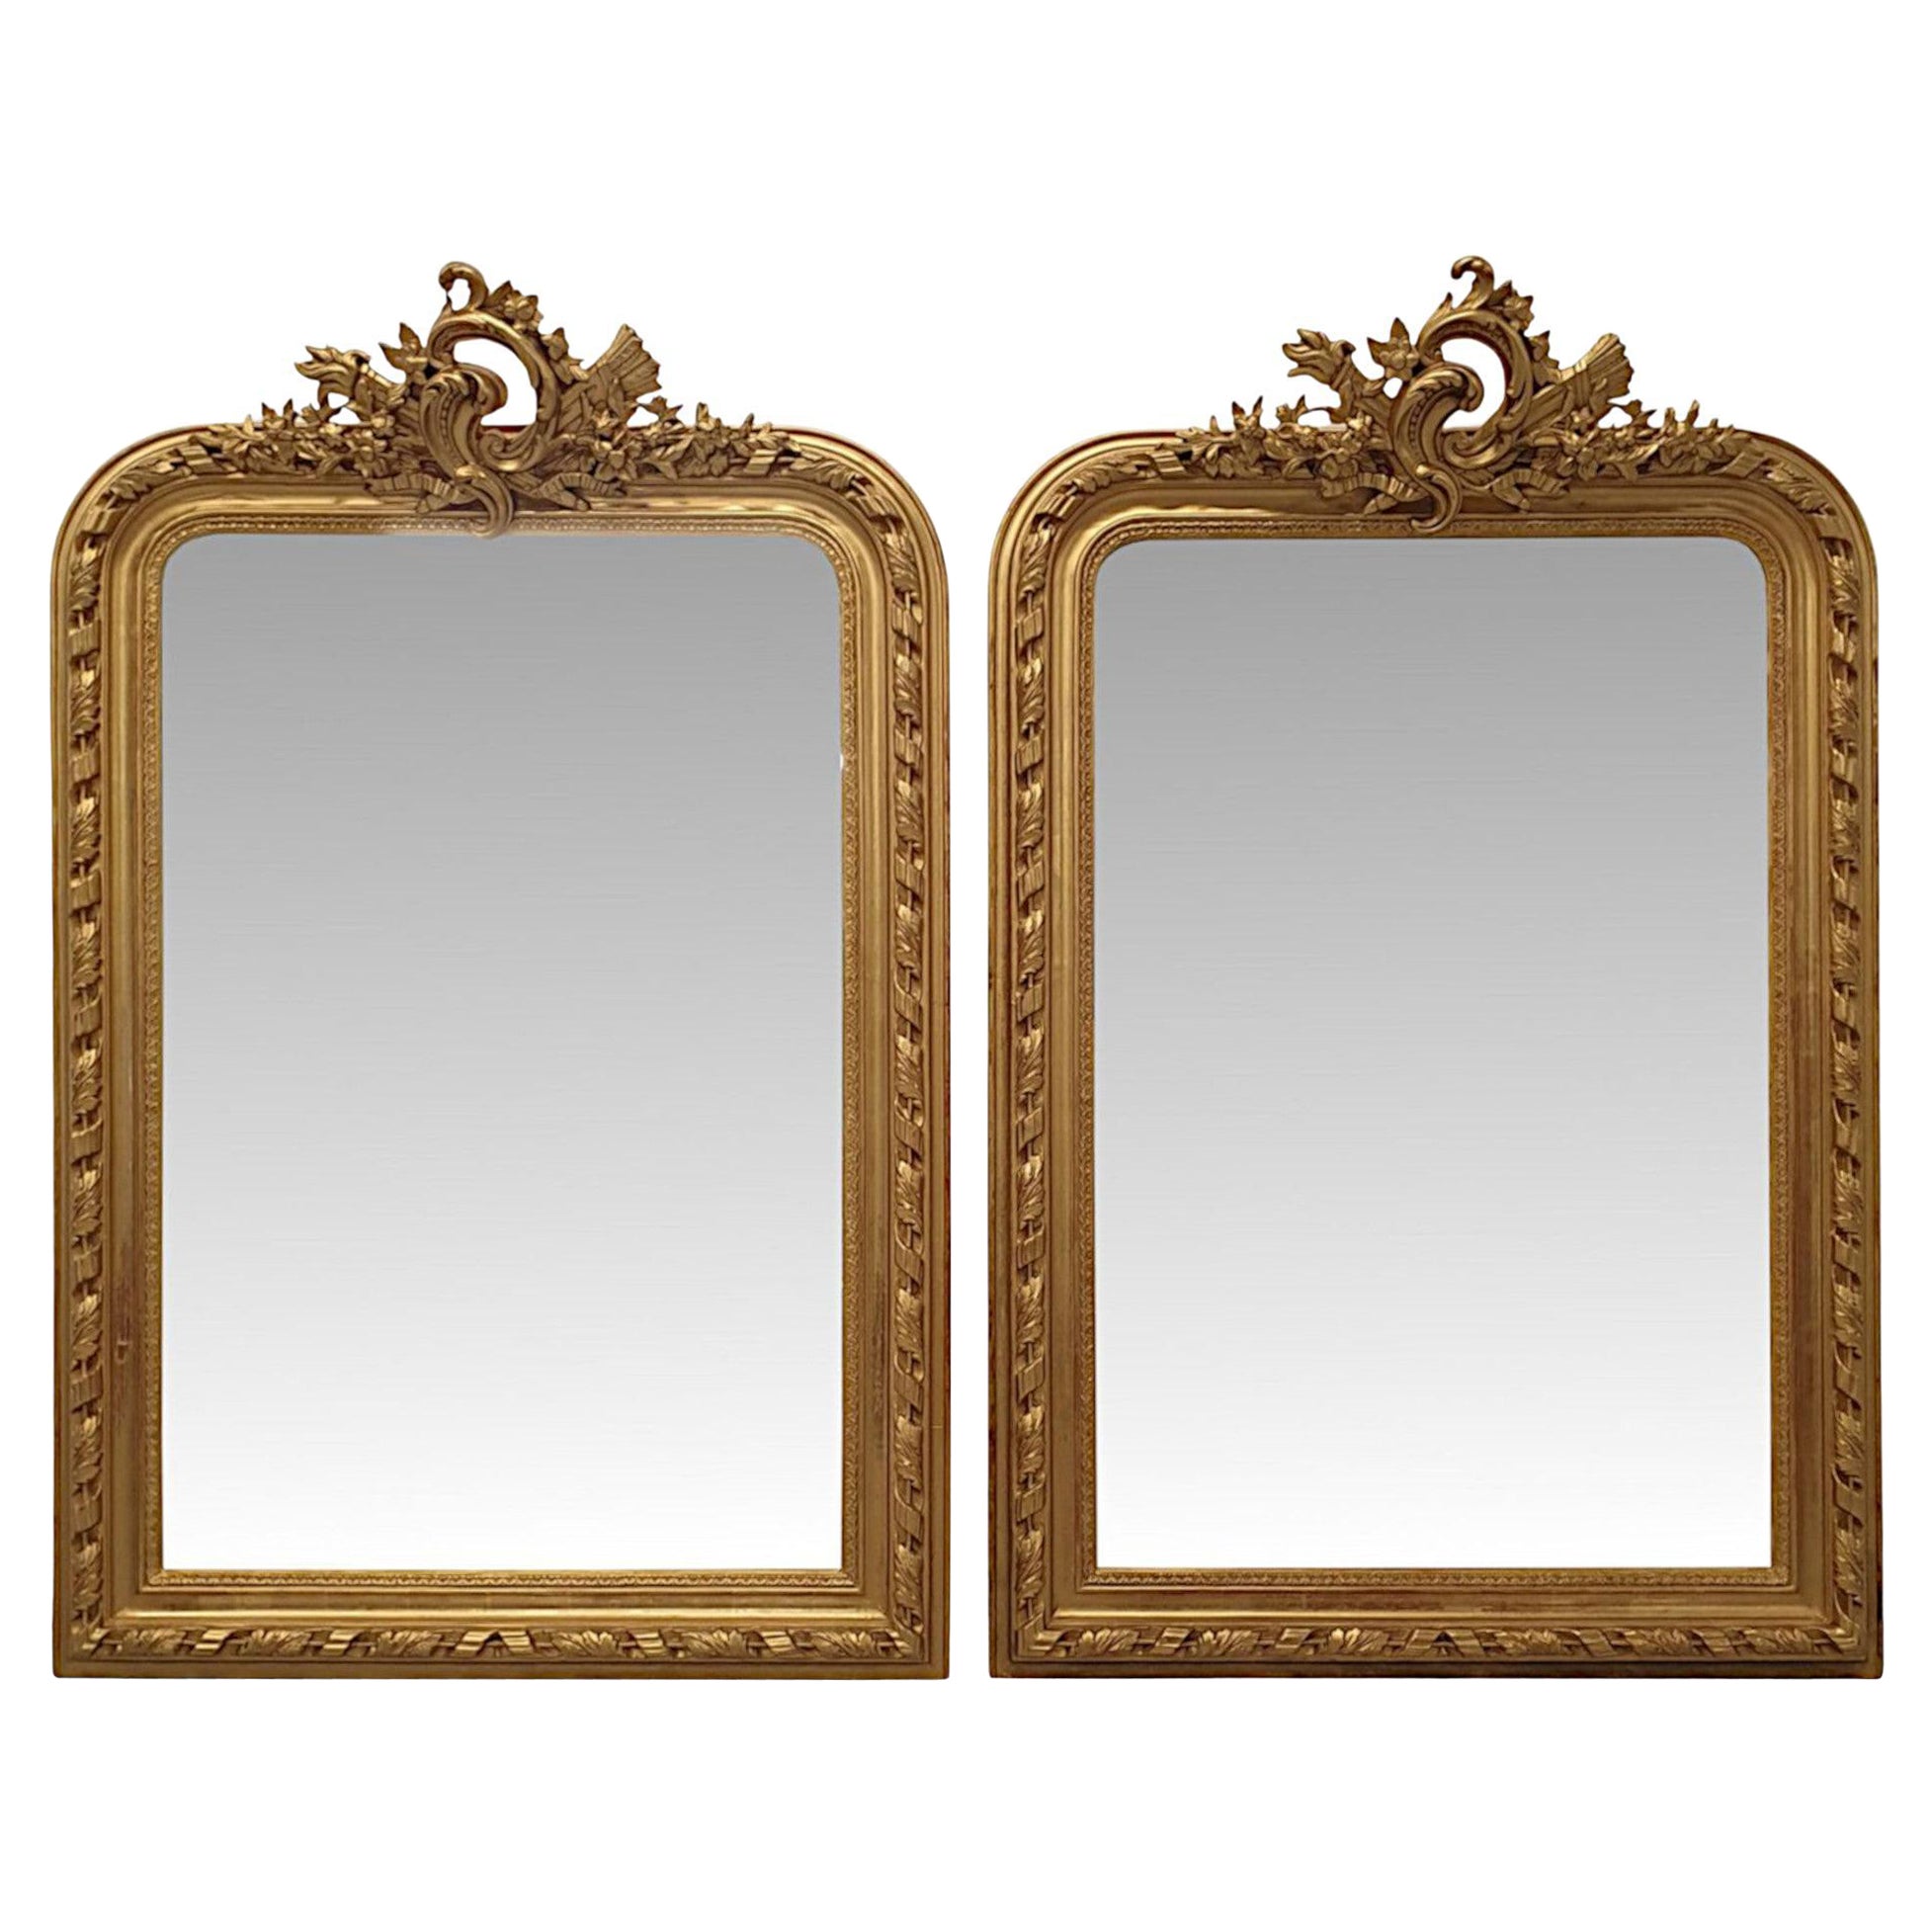 Very Rare and Fine Pair of 19th Century Giltwood Mirrors For Sale